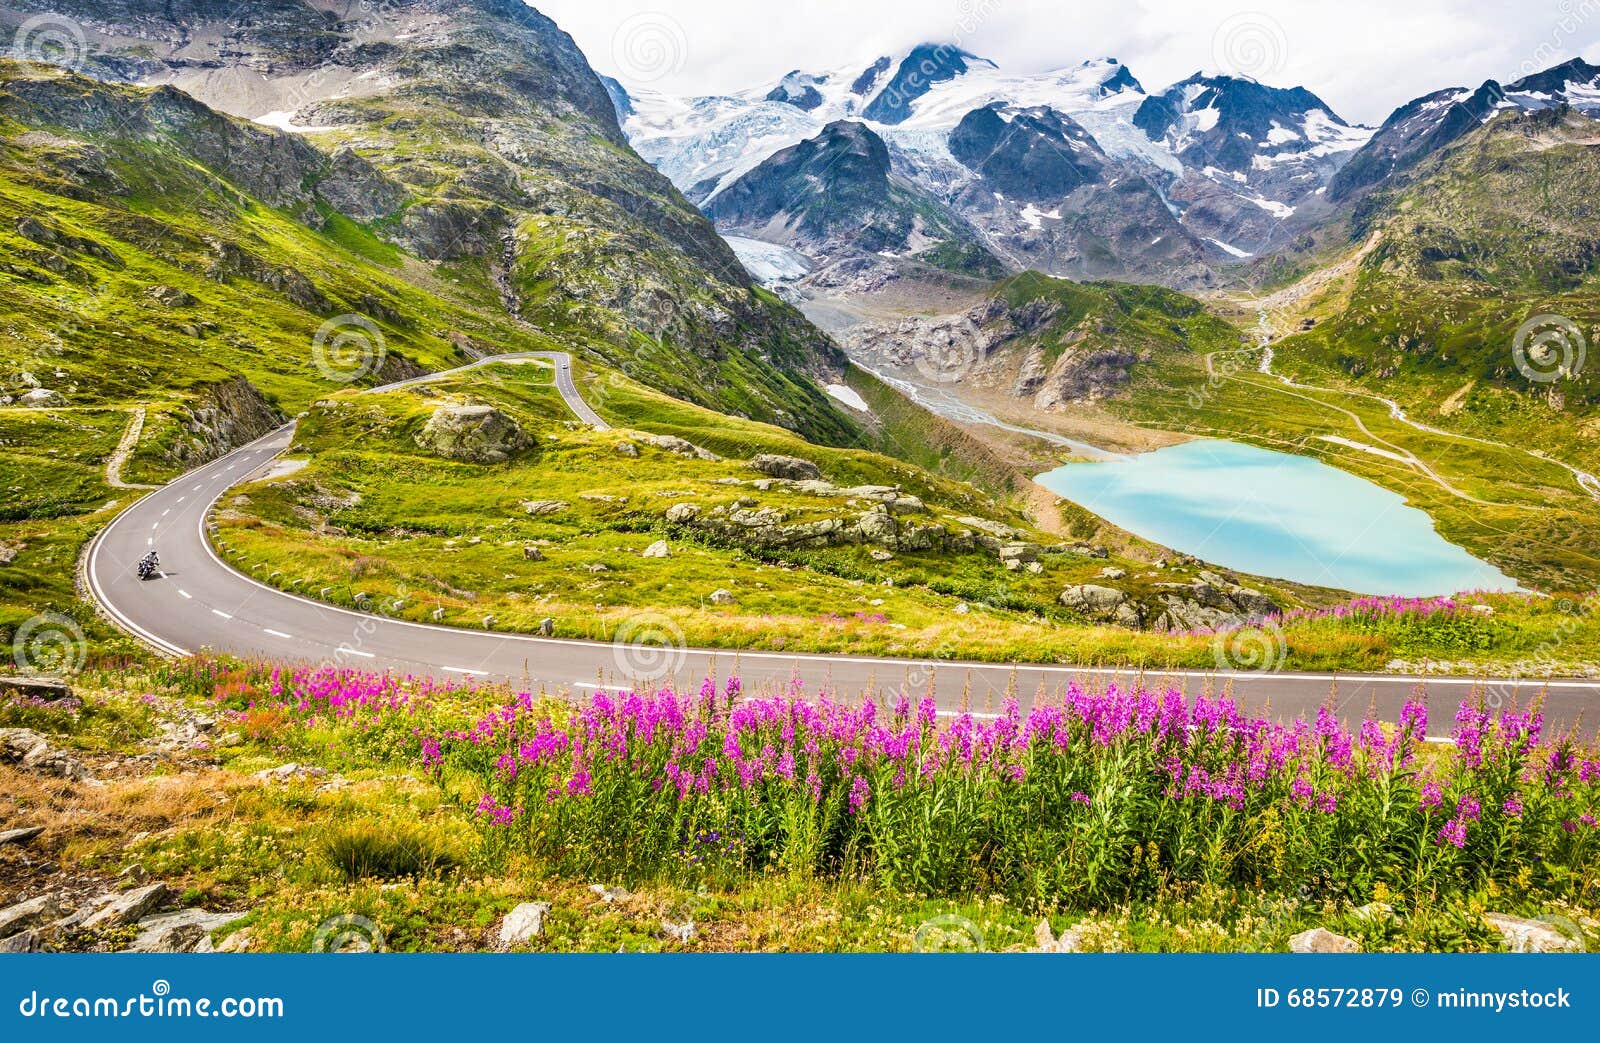 motorcyclist on mountain pass road in the alps